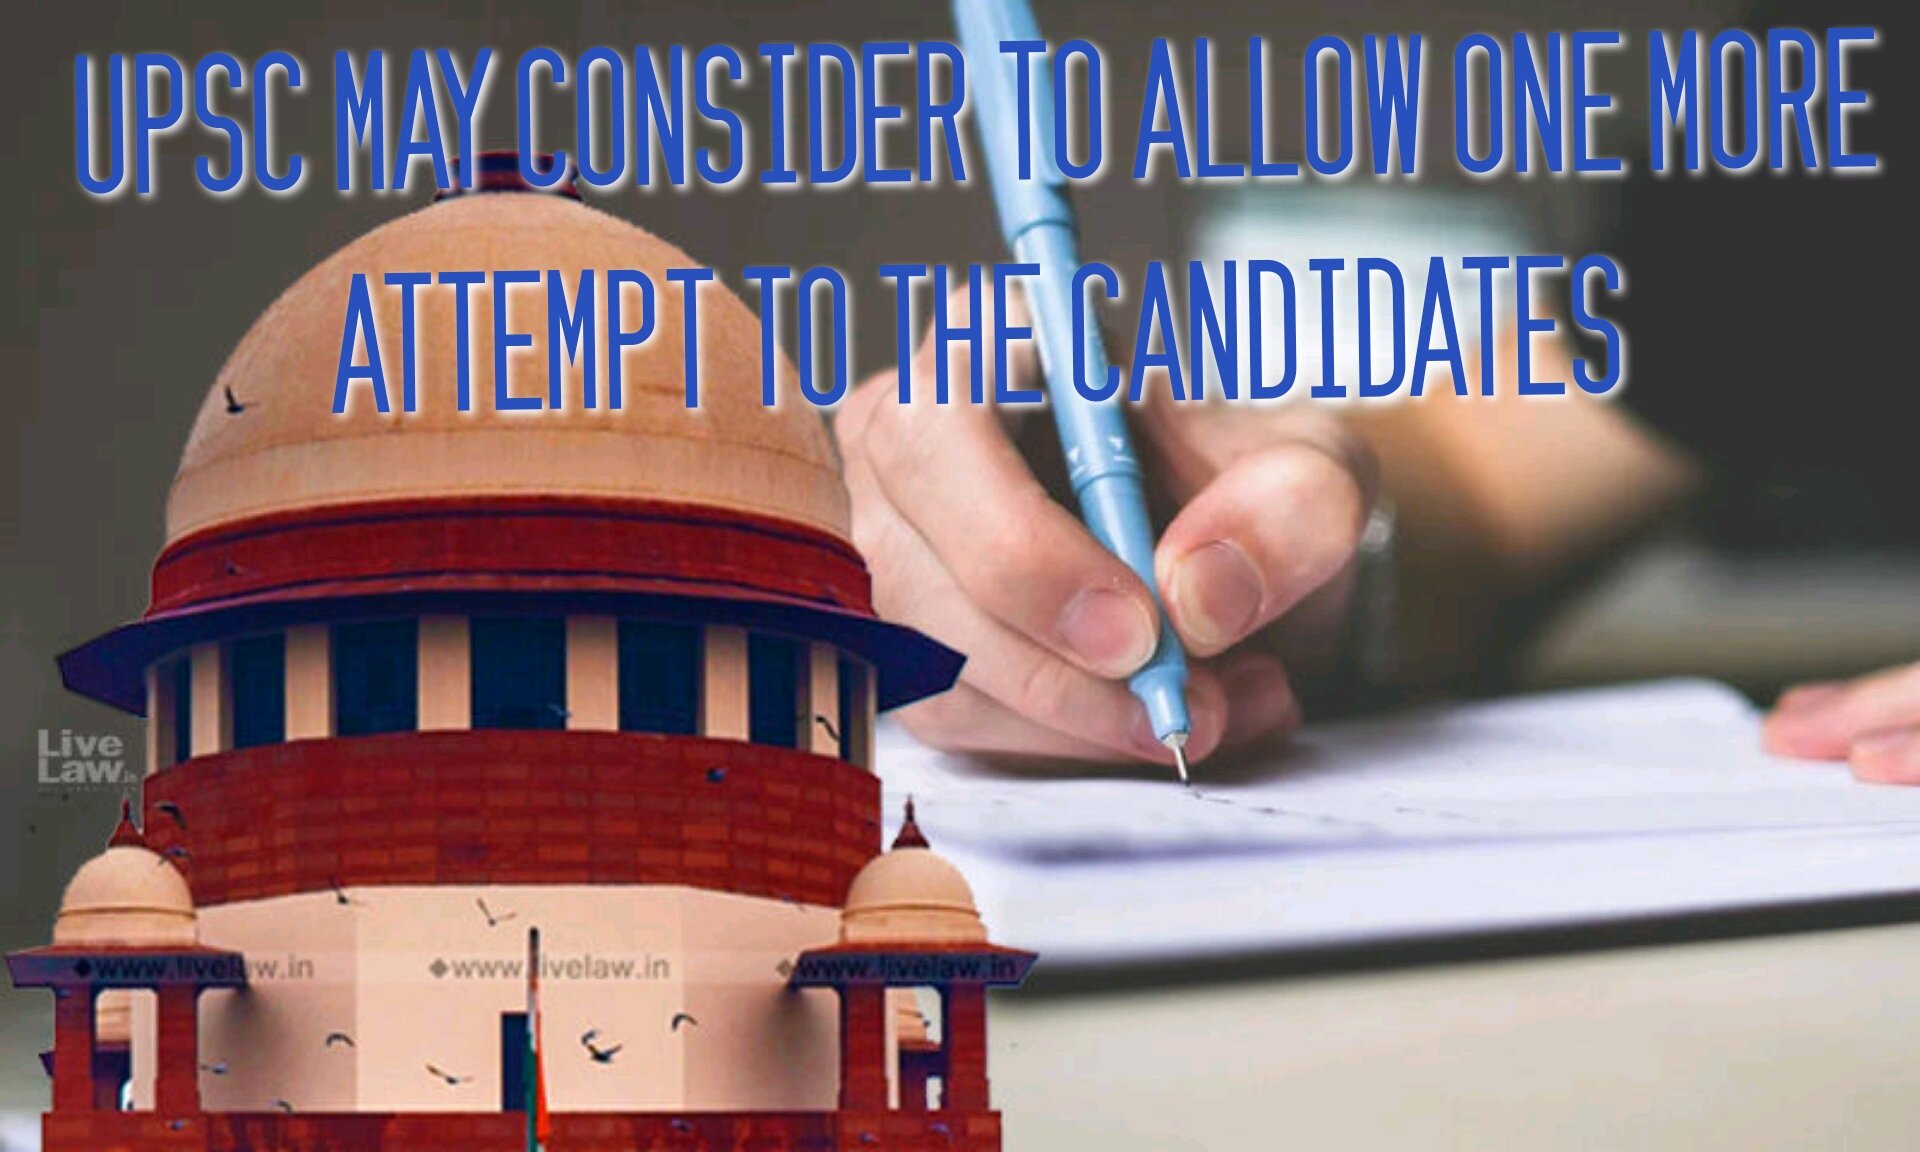 UPSC MAY CONSIDER TO ALLOW ONE  MORE ATTEMPT TO THE CANDIDATES